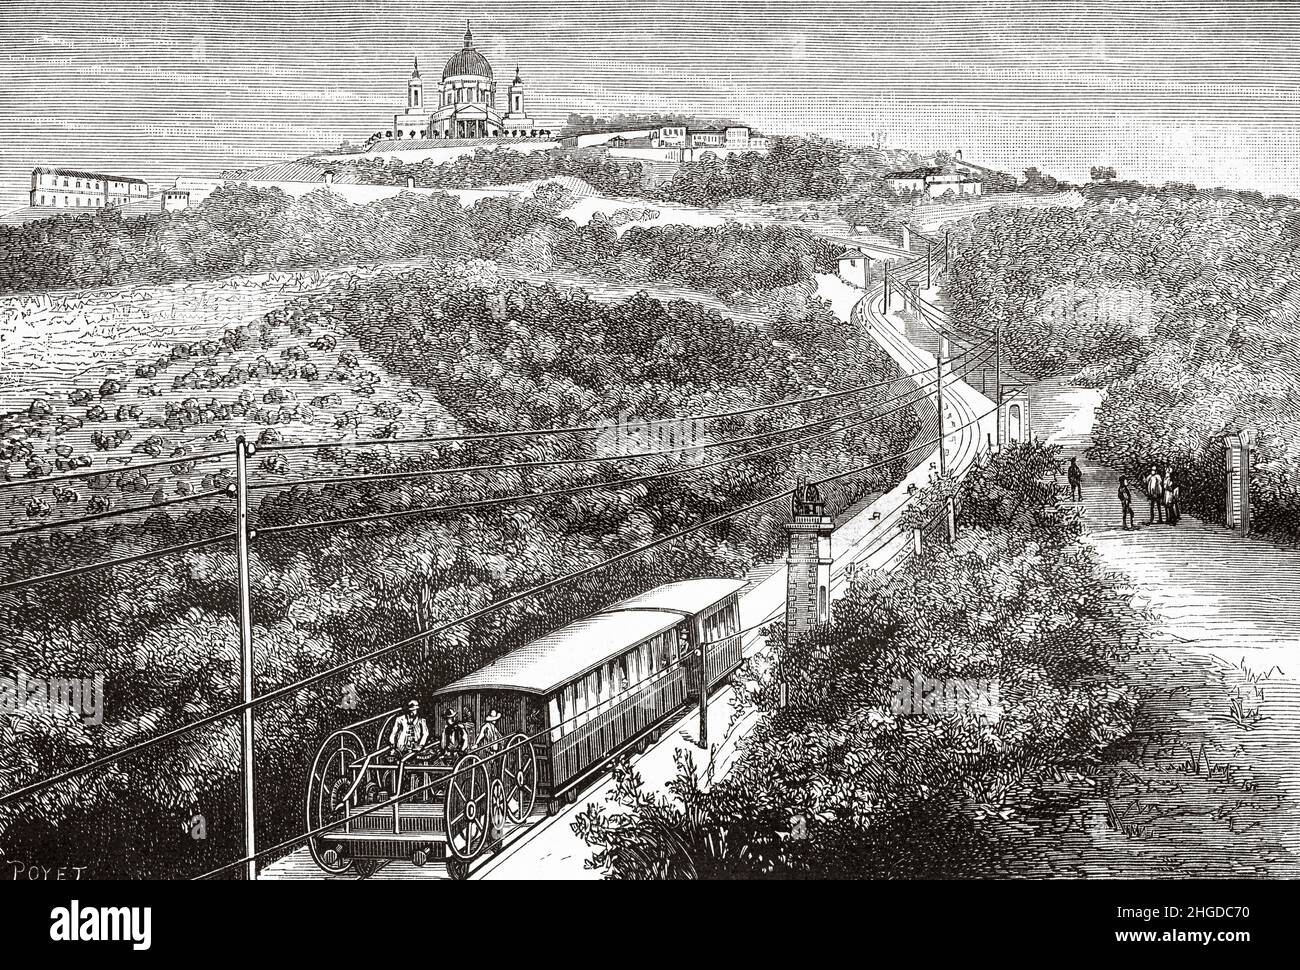 The Superga funicular railway near Turin, Italy. Europe. Old 19th century engraved illustration from La Nature 1884 Stock Photo